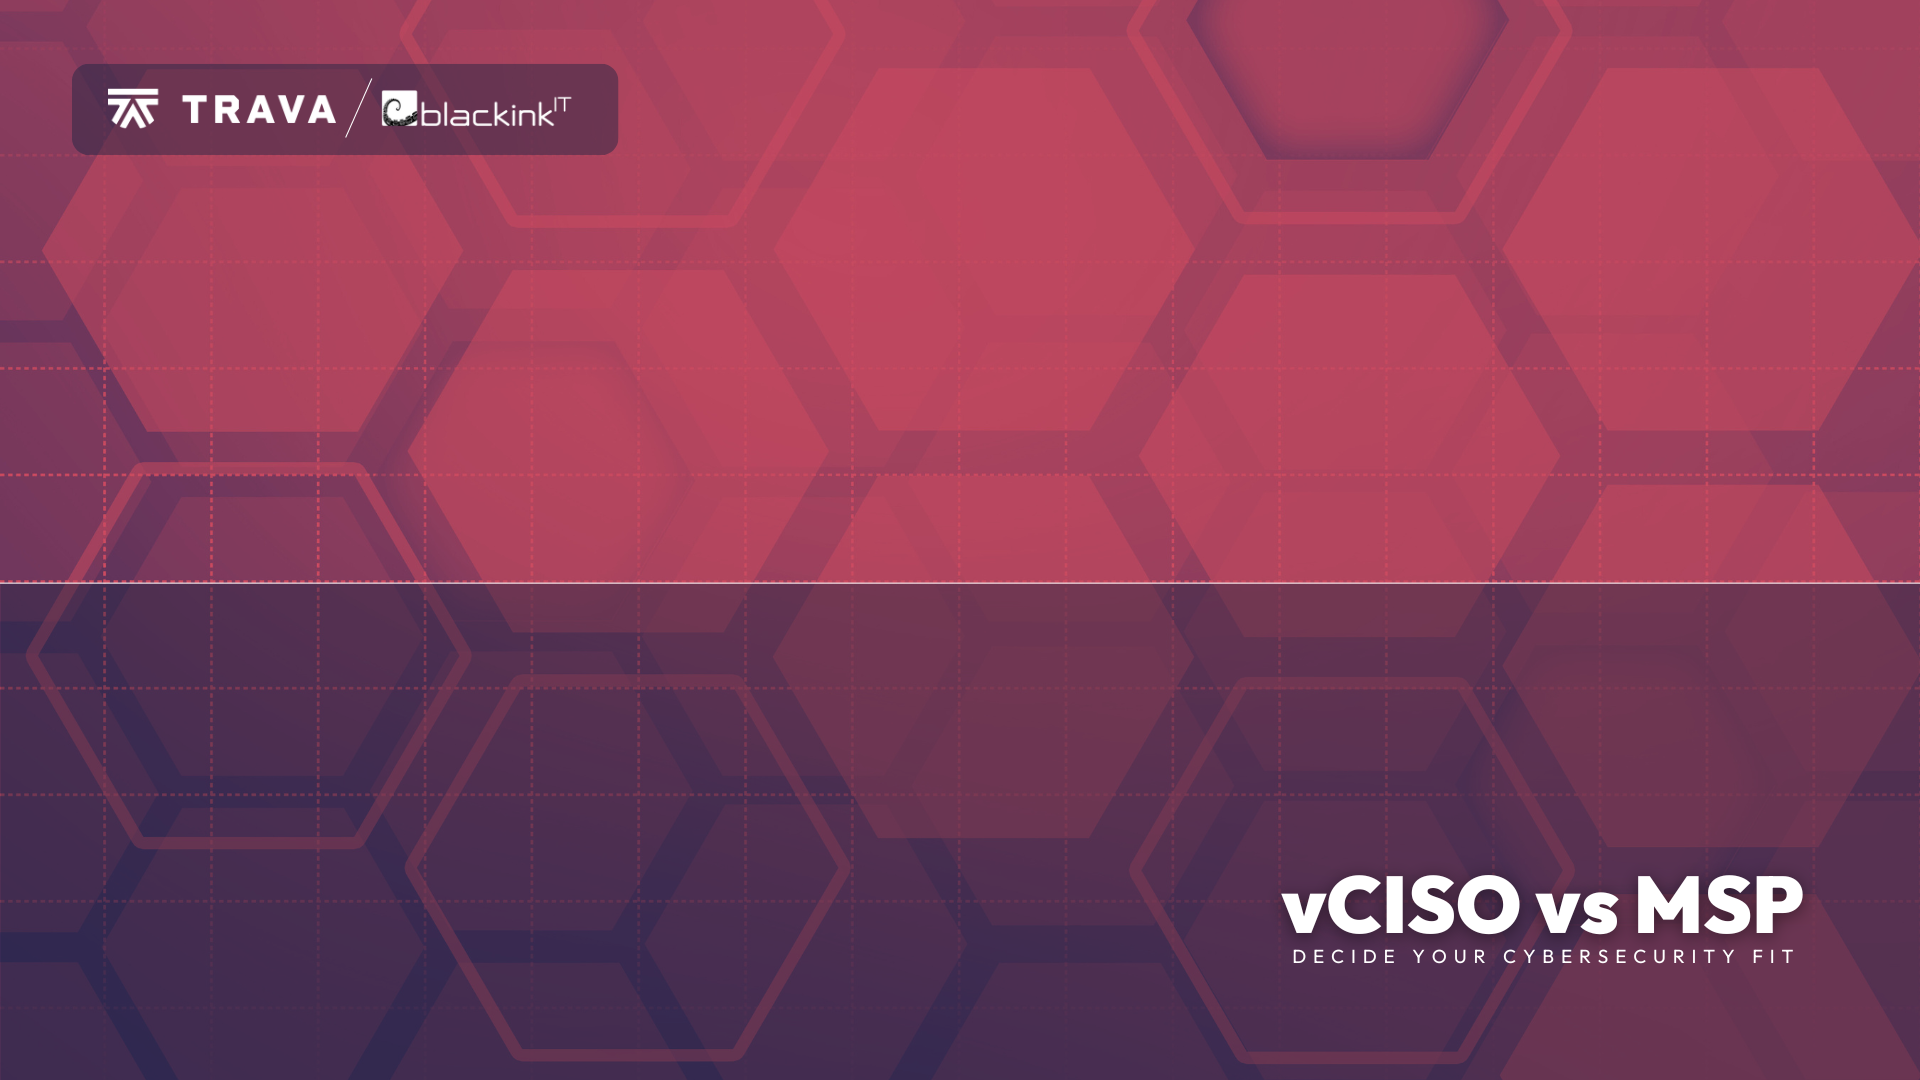 vCISO vs MSP: Decide Your Cybersecurity Fit